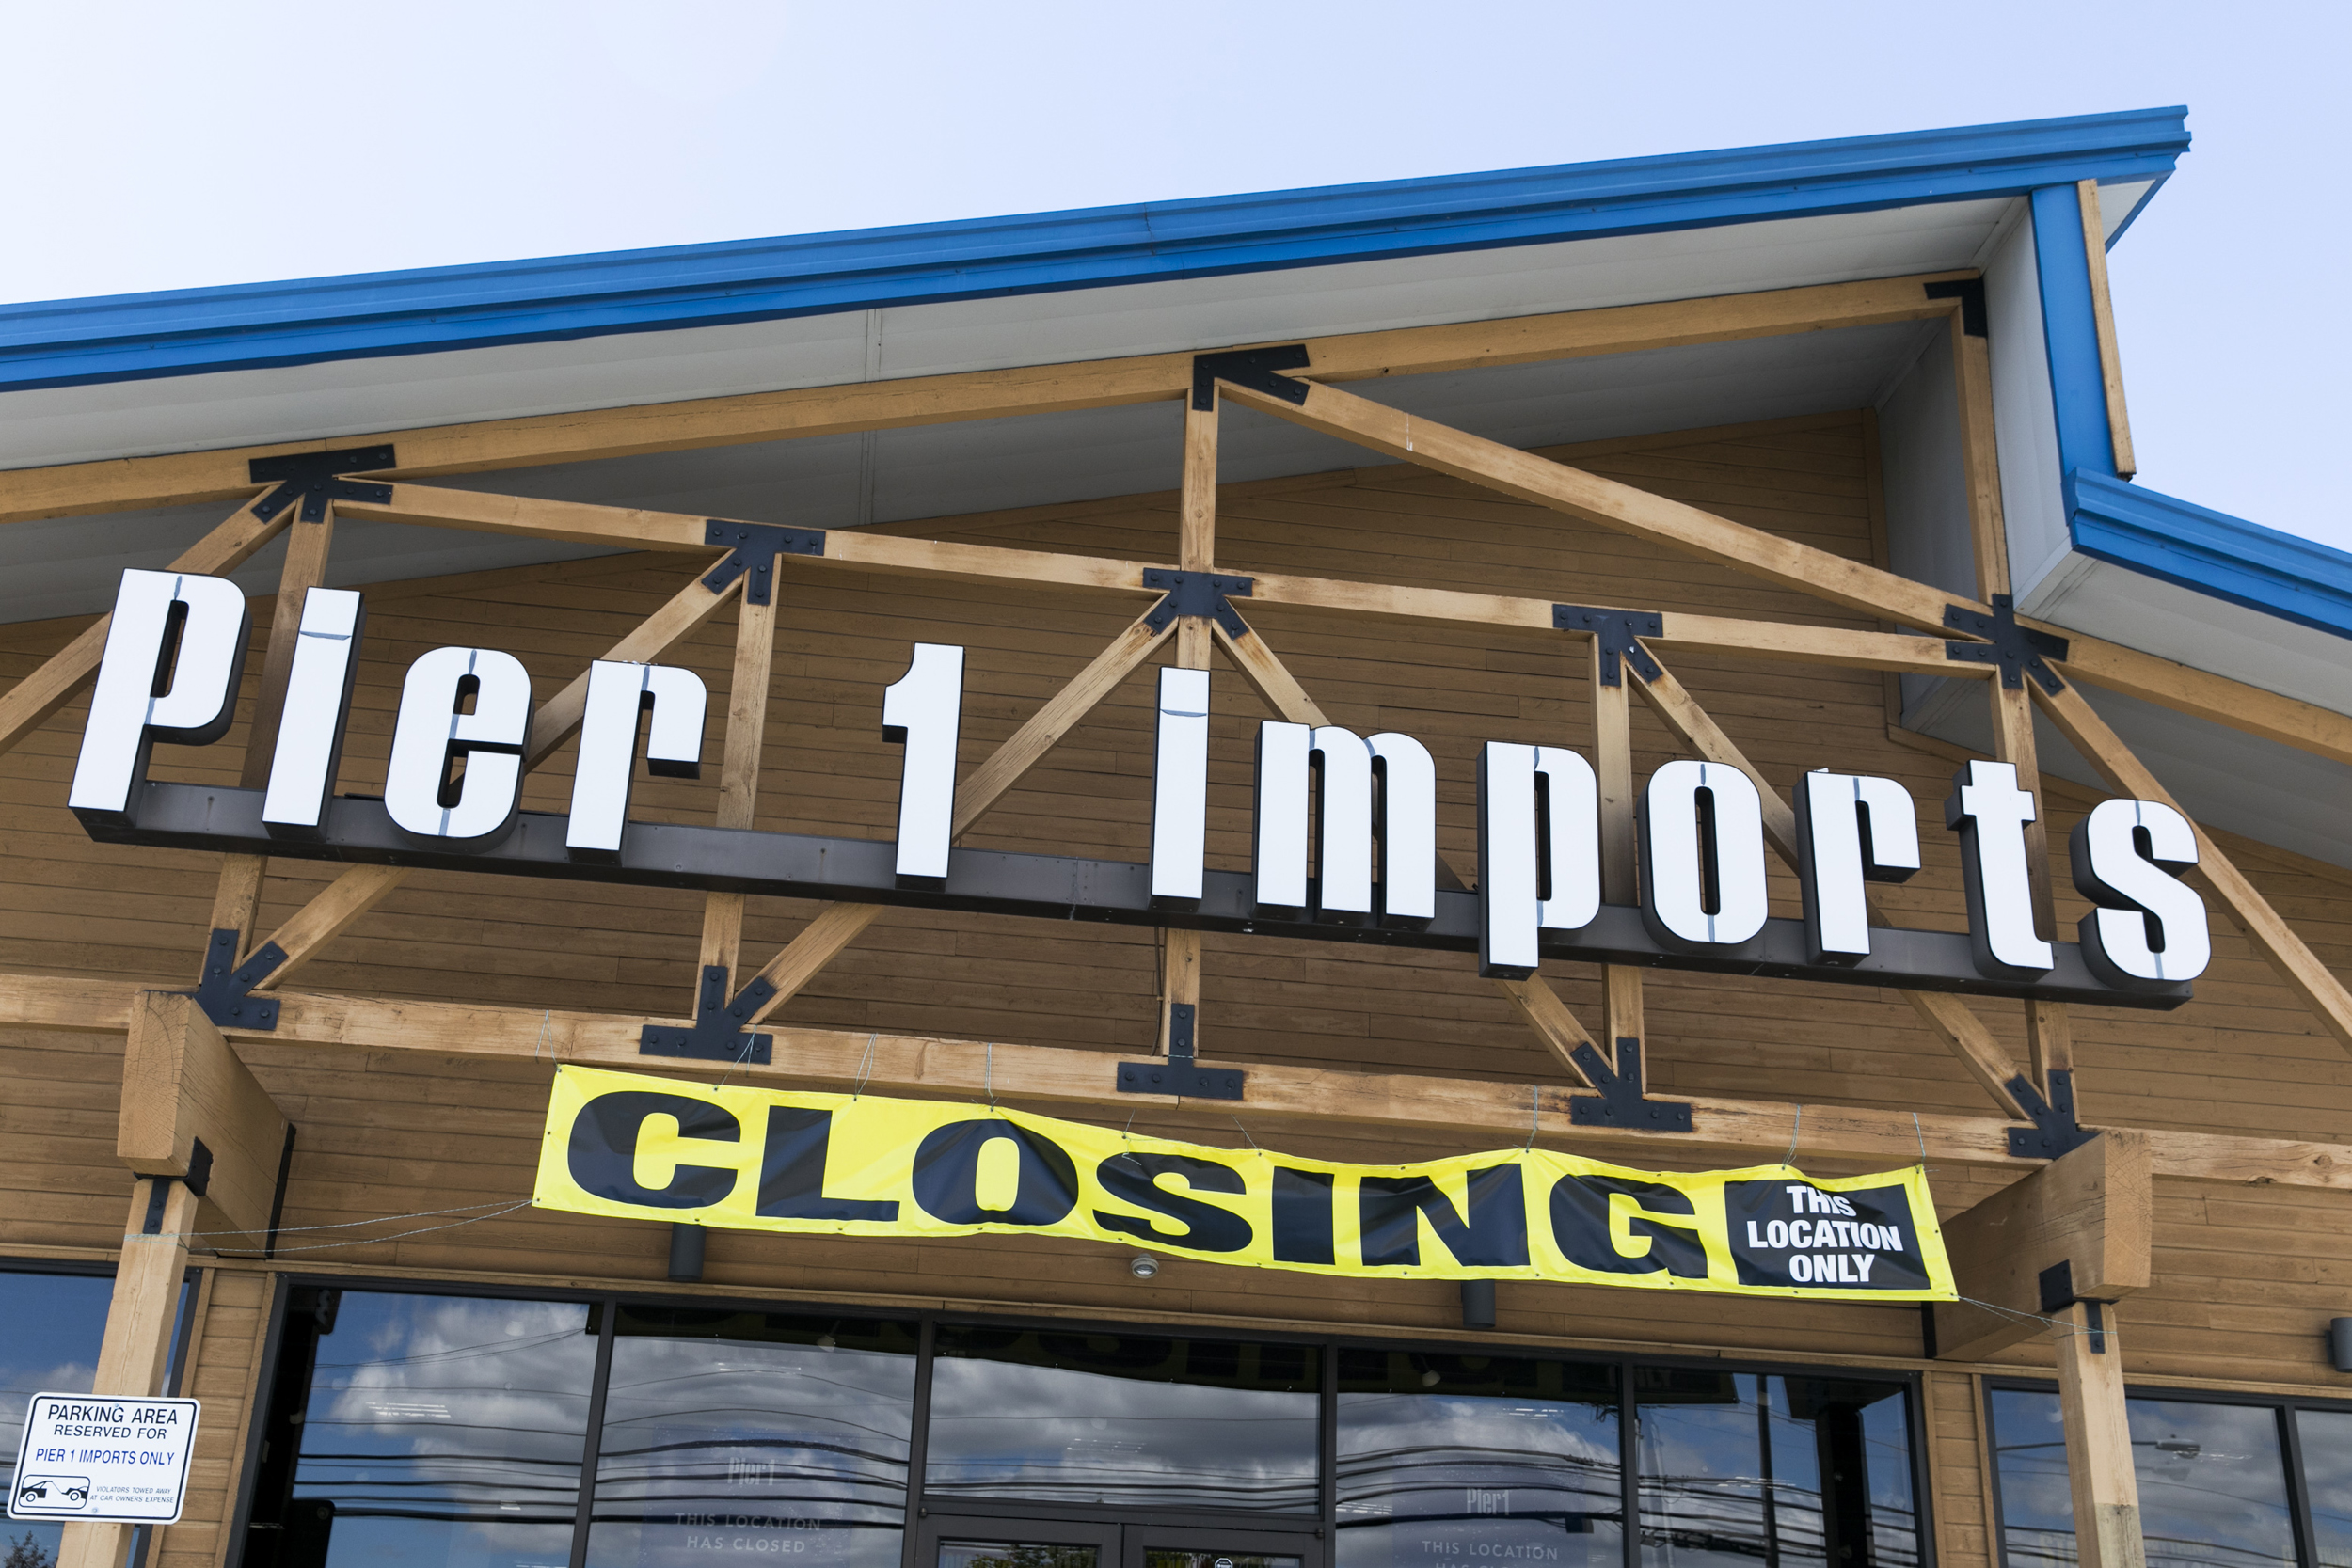 Pier 1 Imports Asks Court to Close All Stores